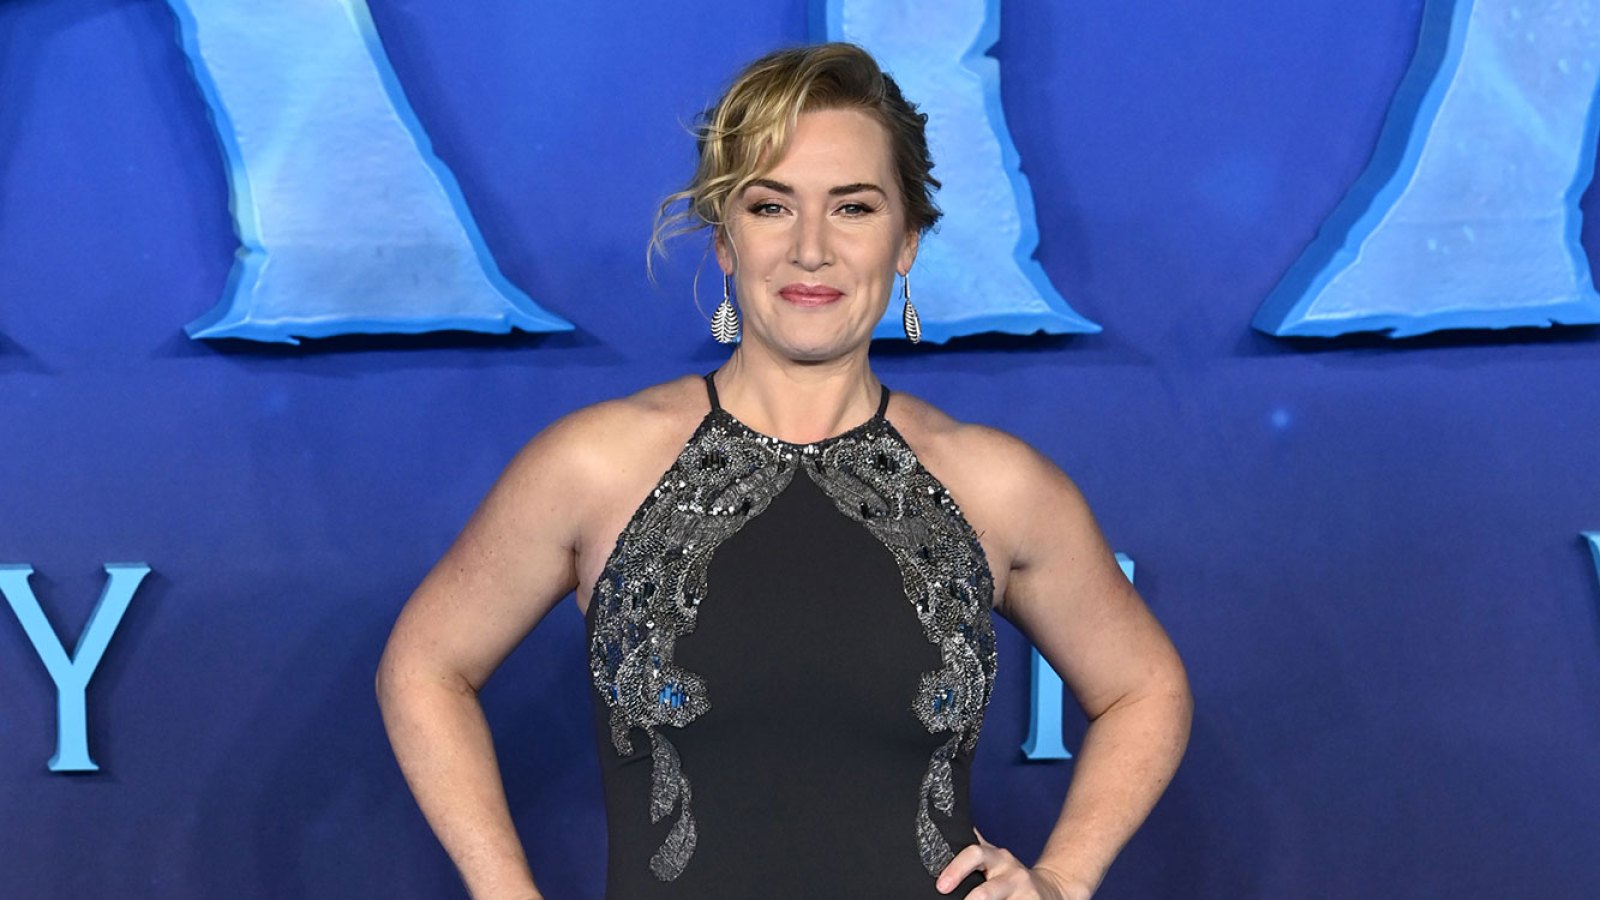 Winslet's in Titanic Has Fans Confused: Pic